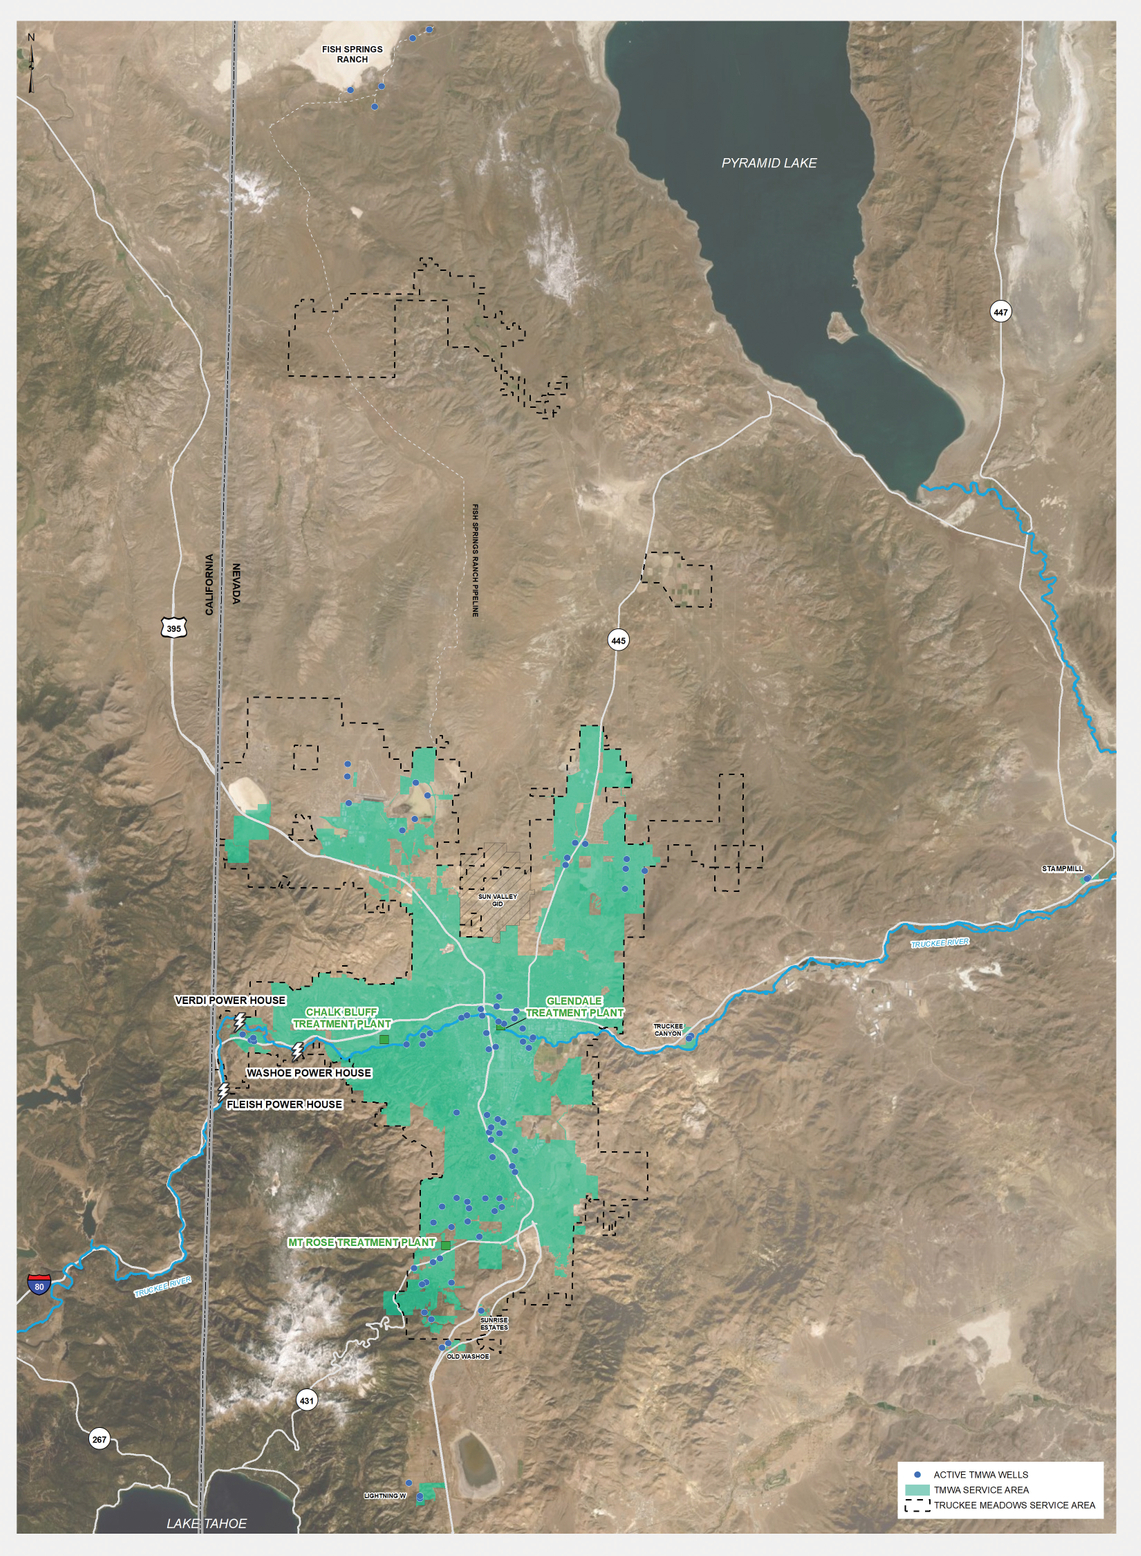 Truckee Meadows Water Authority service area overview